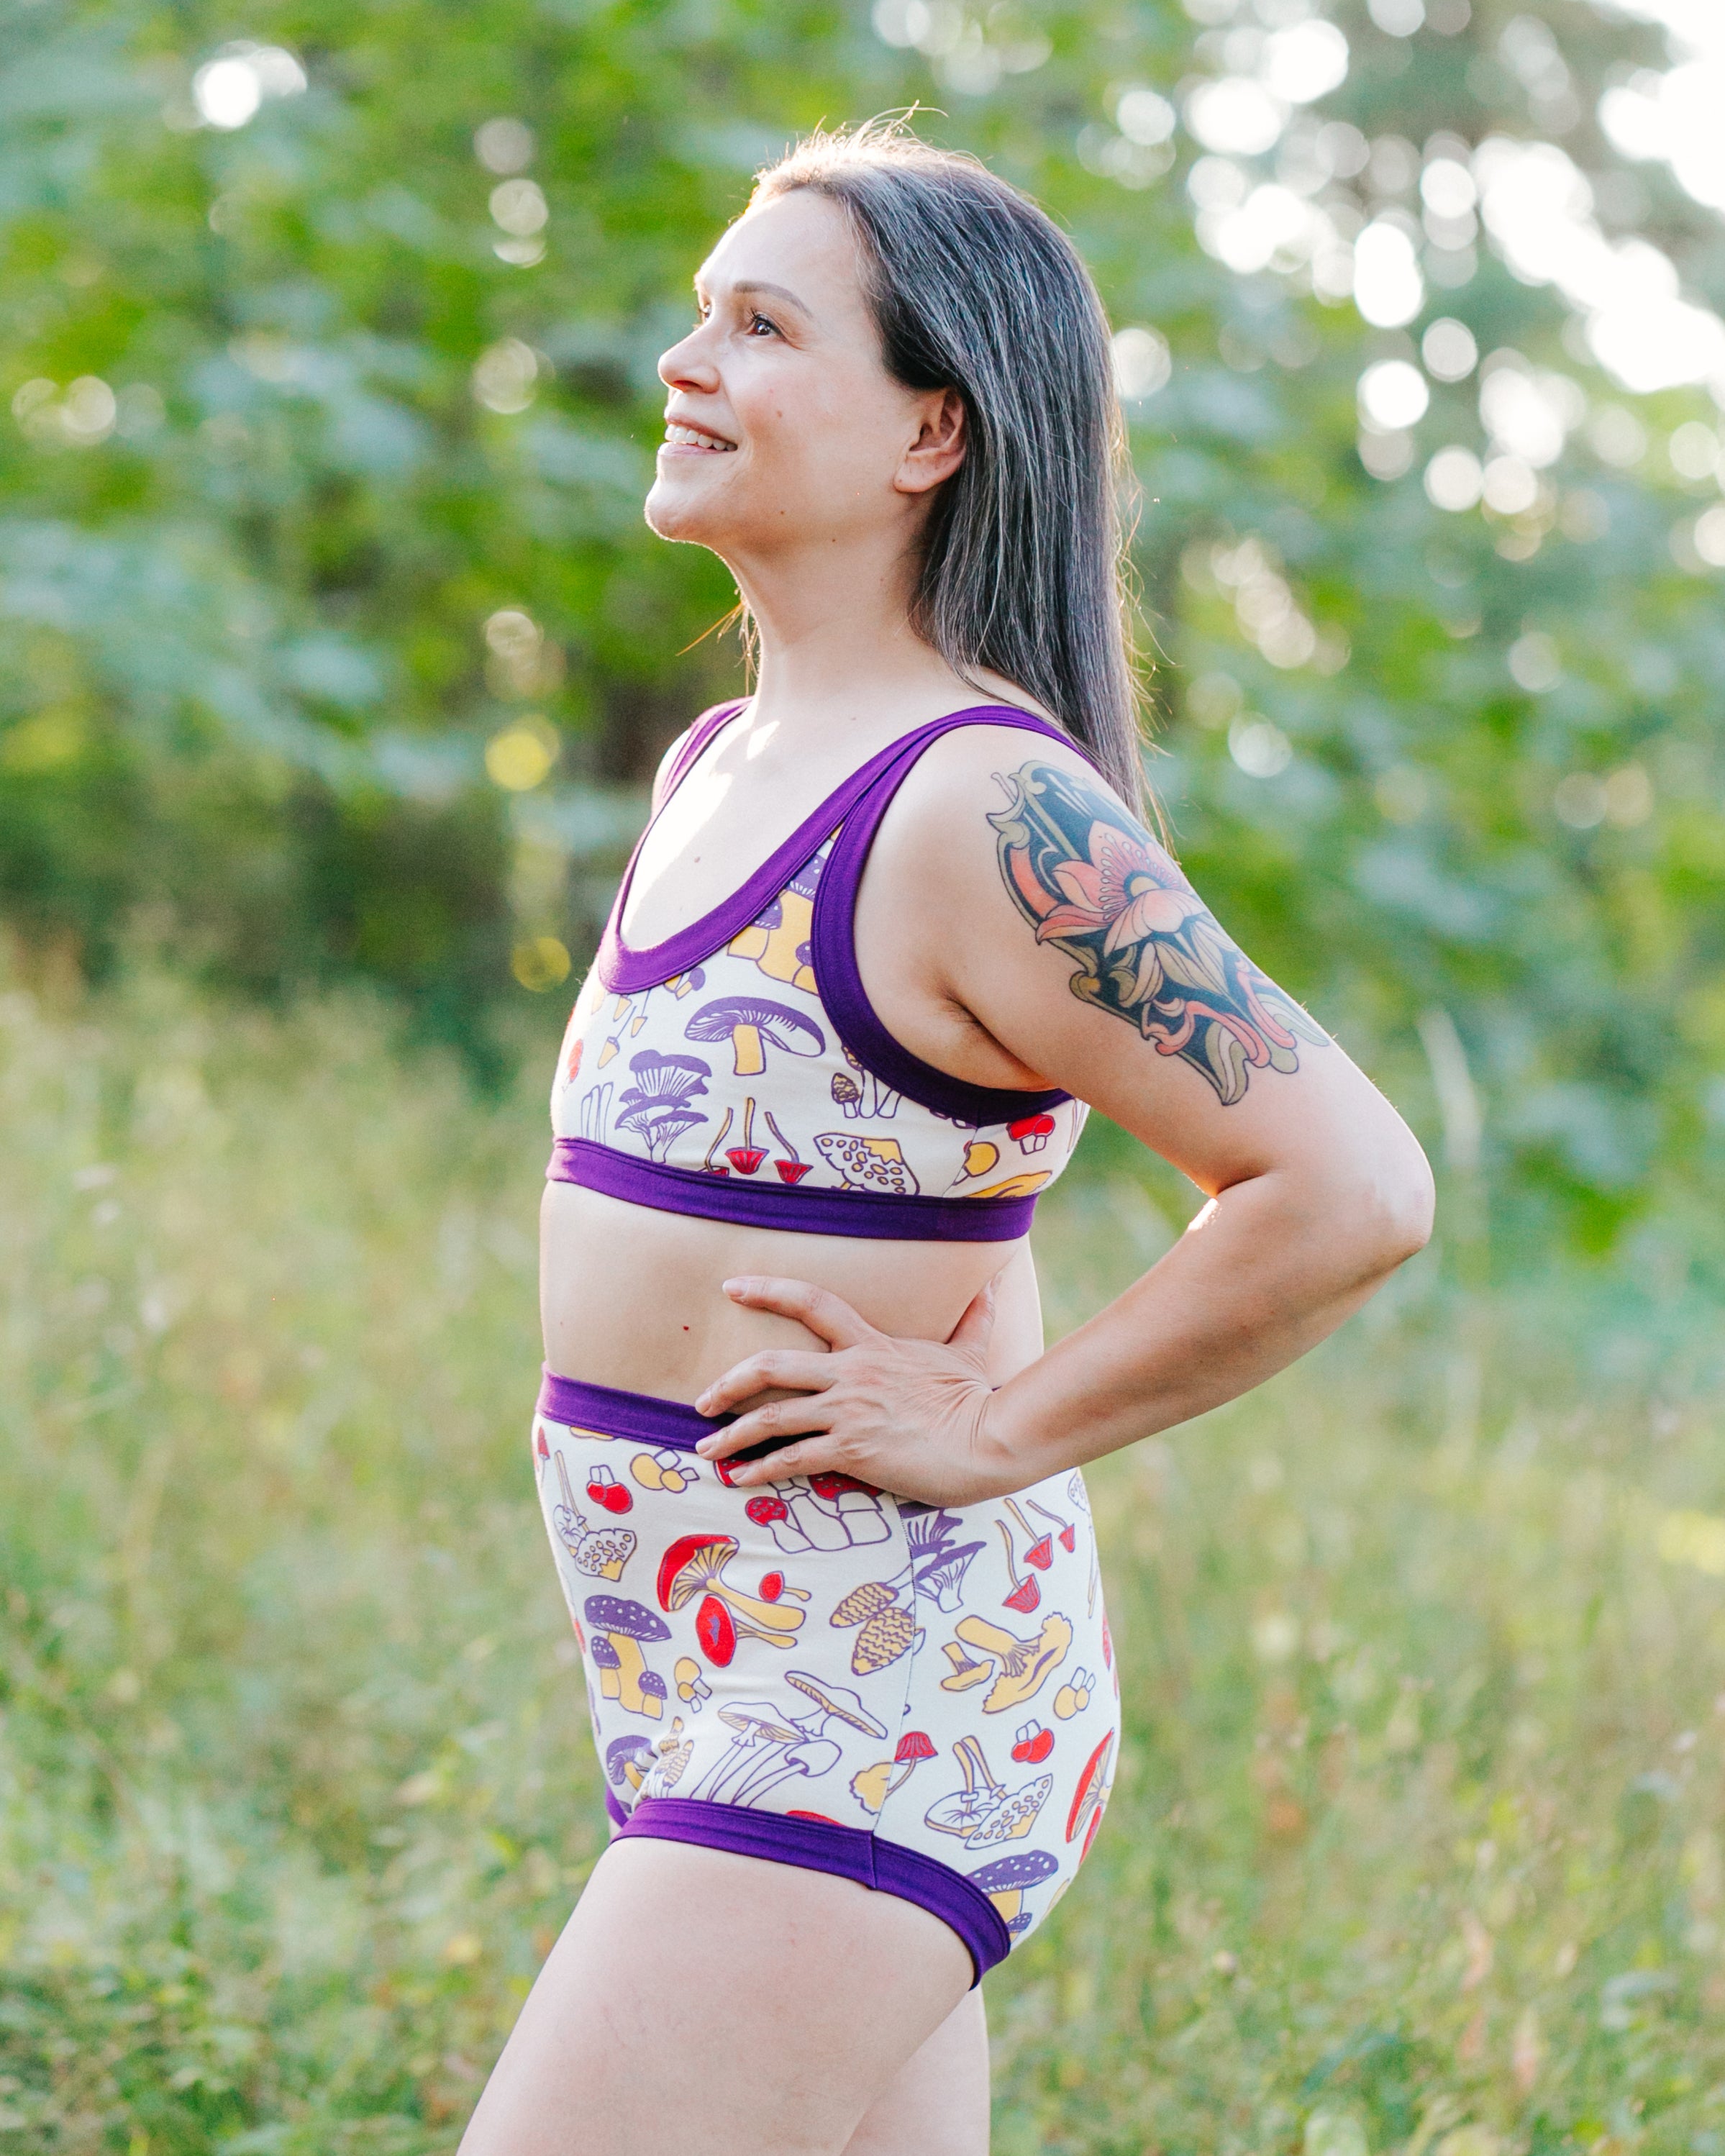 Model in the forest wearing a set of Bralette and Sky Rise style underwear in Mushroom Magic print: different kinds of mushrooms in red, yellow, and purple colors with dark purple binding.